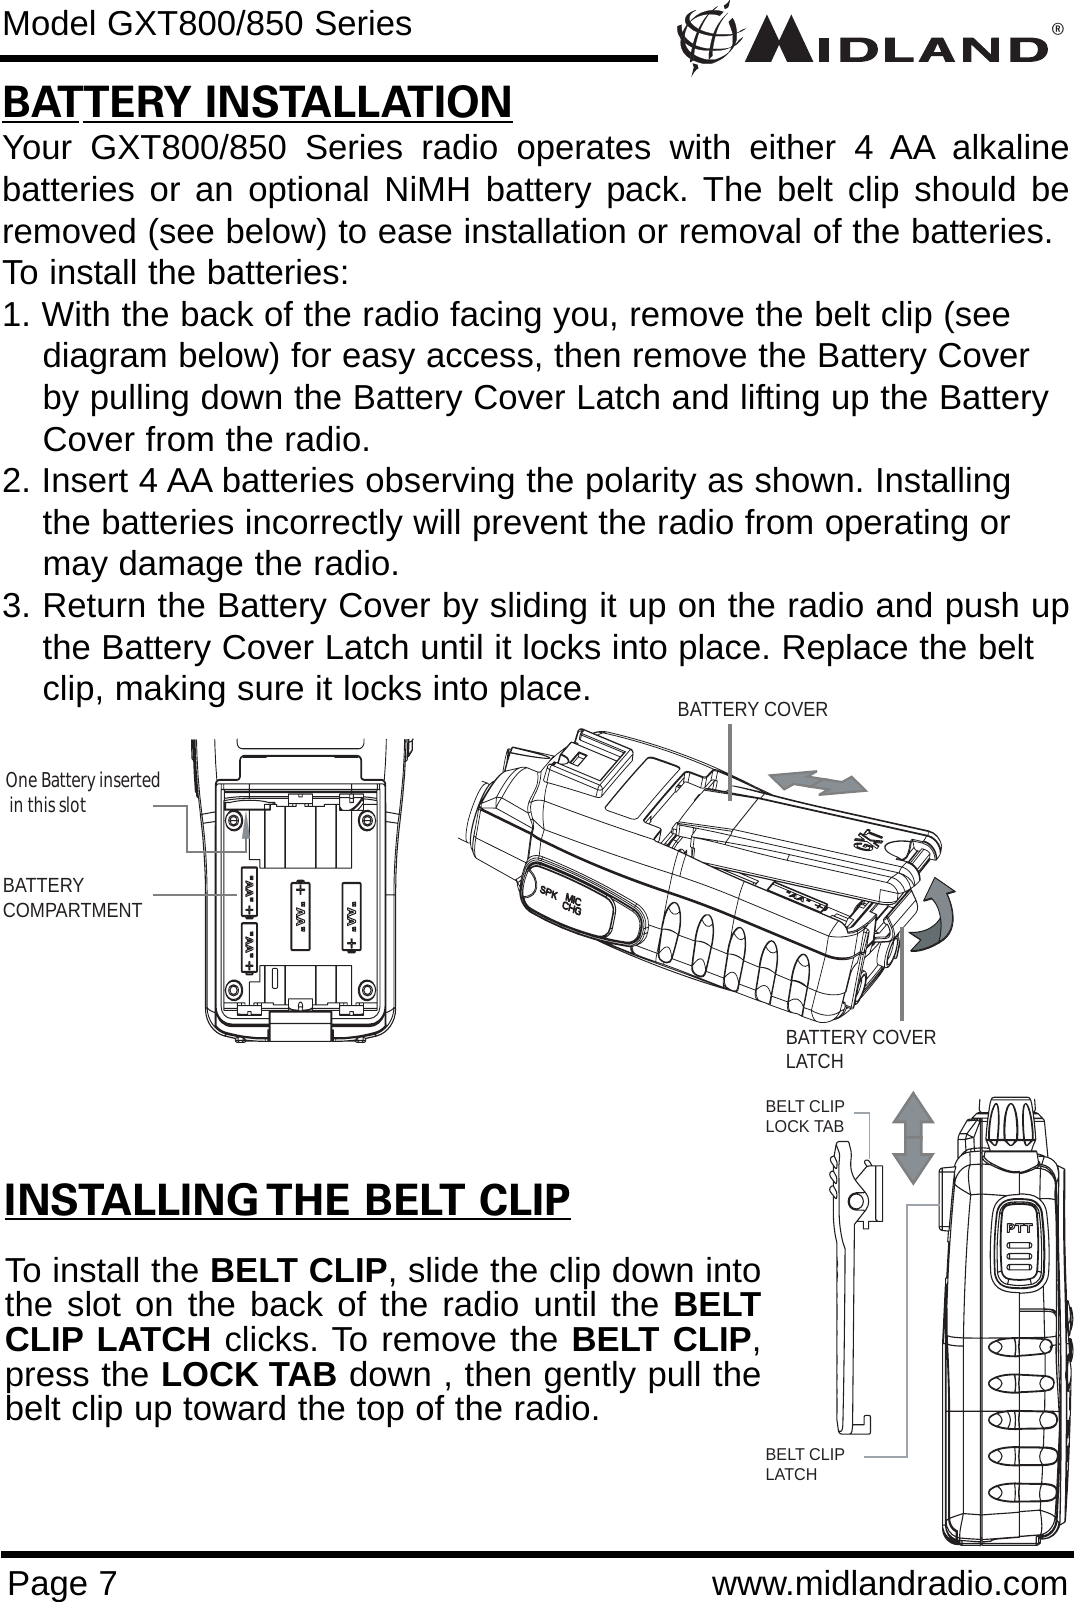 ®Page 7 www.midlandradio.comBATTERY INSTALLATIONYour GXT800/850 Series radio operates with either 4 AA alkalinebatteries or an optional NiMH battery pack. The belt clip should beremoved (see below) to ease installation or removal of the batteries. To install the batteries:1. With the back of the radio facing you, remove the belt clip (see    diagram below) for easy access, then remove the Battery Coverby pulling down the Battery Cover Latch and lifting up the Battery Cover from the radio.2. Insert 4 AA batteries observing the polarity as shown. Installingthe batteries incorrectly will prevent the radio from operating ormay damage the radio.3. Return the Battery Cover by sliding it up on the radio and push upthe Battery Cover Latch until it locks into place. Replace the belt clip, making sure it locks into place.Model GXT800/850 SeriesINSTALLING THE BELT CLIPTo install the BELT CLIP, slide the clip down intothe slot on the back of the radio until the BELTCLIP LATCH clicks. To remove the BELT CLIP,press the LOCK TAB down , then gently pull thebelt clip up toward the top of the radio.BATTERYCOMPARTMENTOne Battery inserted  in this slotBATTERY COVERBATTERY COVERLATCHBELT CLIPLOCK TABBELT CLIP LATCH